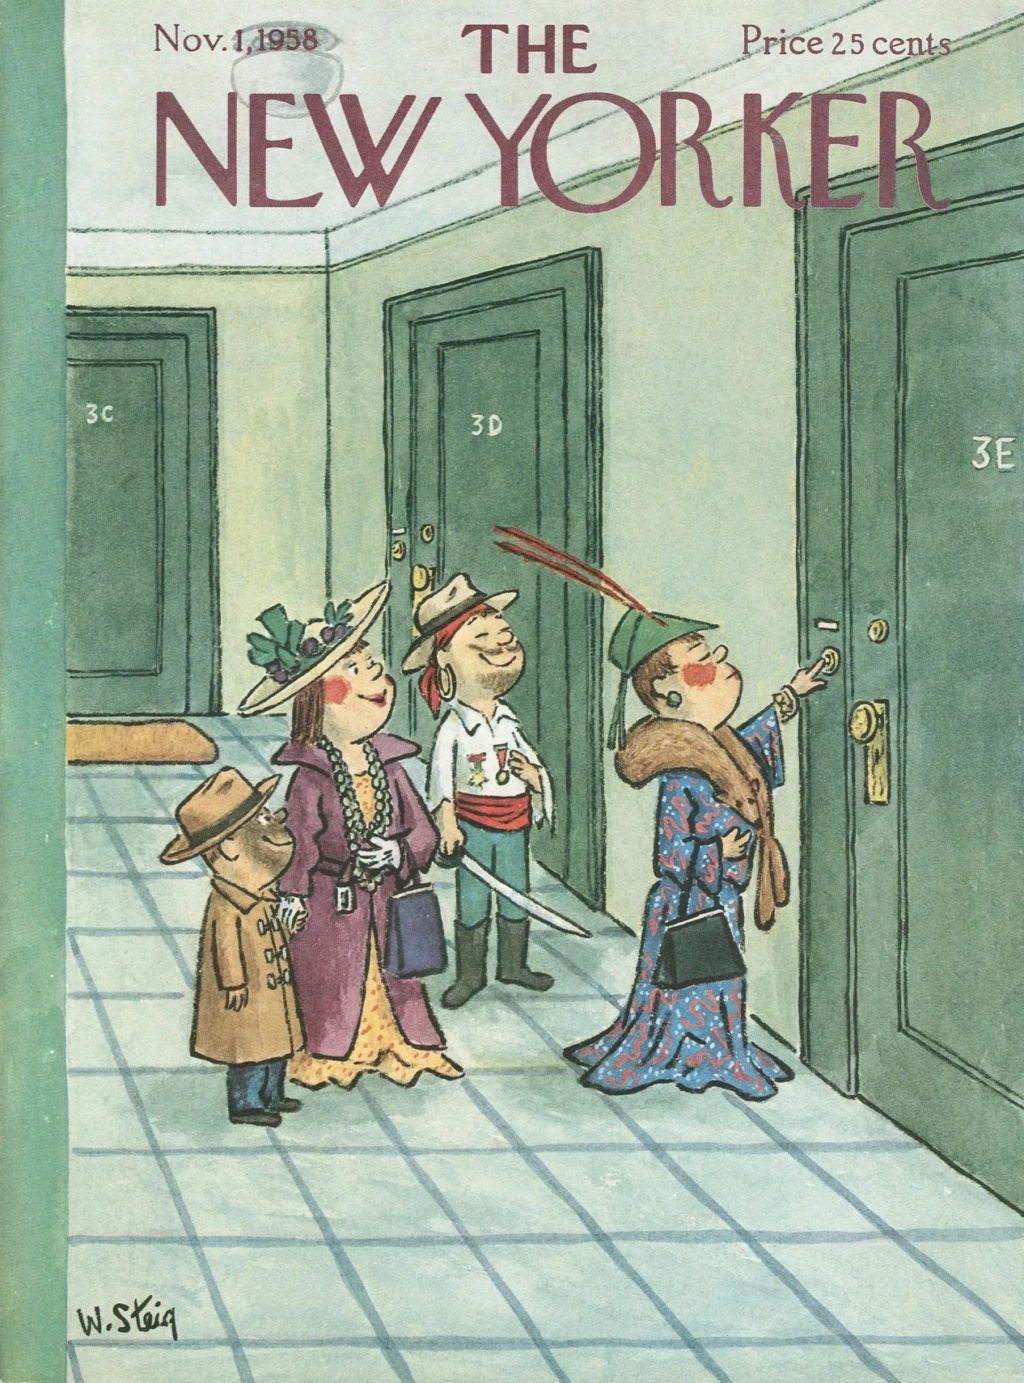 The New Yorker : Les couvertures - Page 2 Hallow15